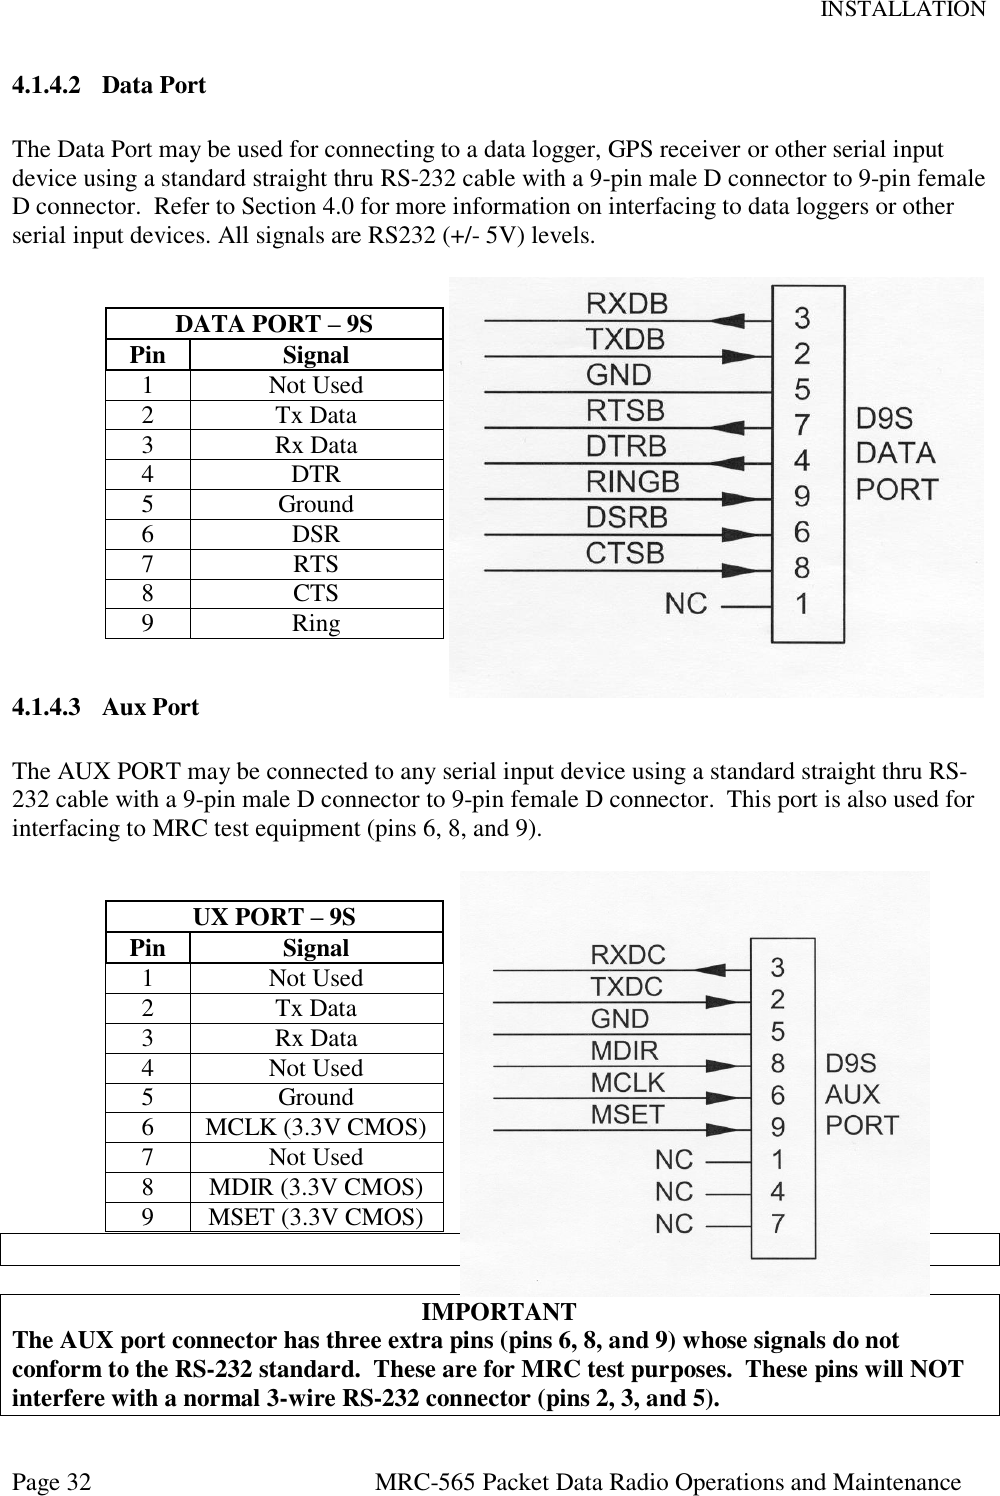 INSTALLATION Page 32  MRC-565 Packet Data Radio Operations and Maintenance 4.1.4.2 Data Port  The Data Port may be used for connecting to a data logger, GPS receiver or other serial input device using a standard straight thru RS-232 cable with a 9-pin male D connector to 9-pin female D connector.  Refer to Section 4.0 for more information on interfacing to data loggers or other serial input devices. All signals are RS232 (+/- 5V) levels.   DATA PORT – 9S Pin Signal 1 Not Used 2 Tx Data  3 Rx Data  4 DTR  5 Ground 6 DSR  7 RTS  8 CTS  9 Ring   4.1.4.3 Aux Port  The AUX PORT may be connected to any serial input device using a standard straight thru RS-232 cable with a 9-pin male D connector to 9-pin female D connector.  This port is also used for interfacing to MRC test equipment (pins 6, 8, and 9).   UX PORT – 9S Pin Signal 1 Not Used 2 Tx Data  3 Rx Data 4 Not Used 5 Ground 6 MCLK (3.3V CMOS) 7 Not Used  8 MDIR (3.3V CMOS)  9 MSET (3.3V CMOS)   IMPORTANT The AUX port connector has three extra pins (pins 6, 8, and 9) whose signals do not conform to the RS-232 standard.  These are for MRC test purposes.  These pins will NOT interfere with a normal 3-wire RS-232 connector (pins 2, 3, and 5). 